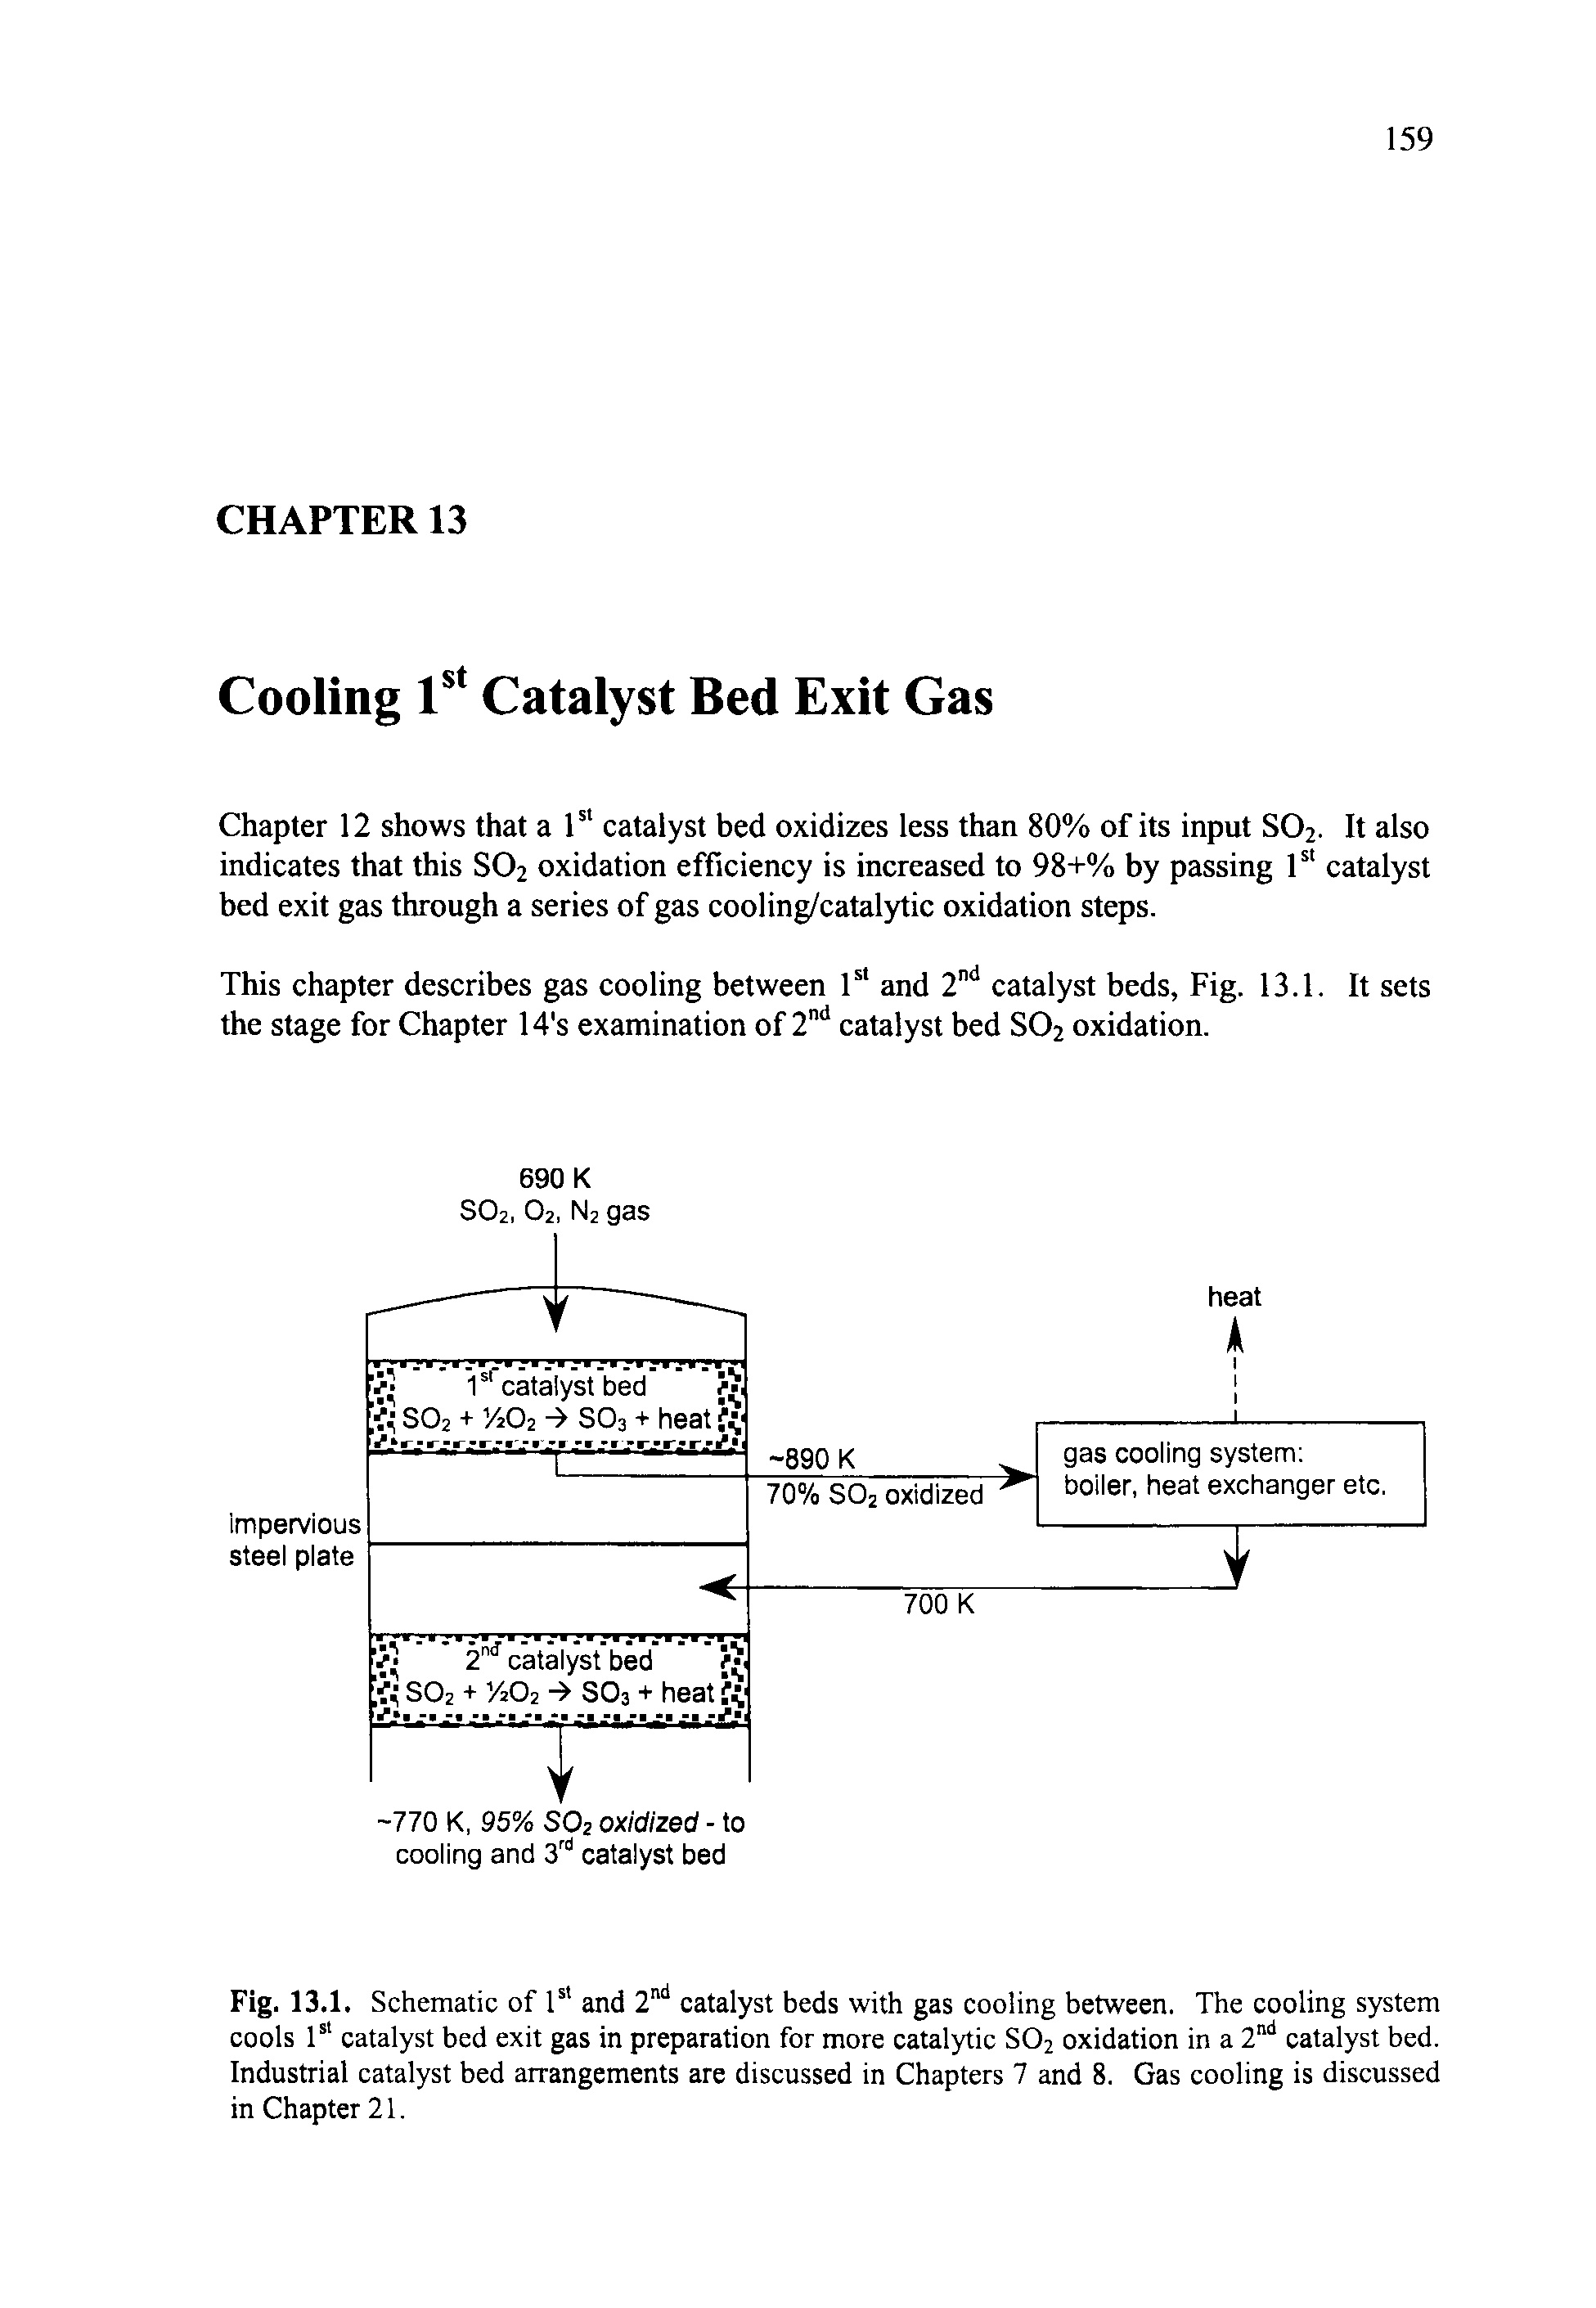 Fig. 13.1. Schematic of 1st and 2nd catalyst beds with gas cooling between. The cooling system cools lsl catalyst bed exit gas in preparation for more catalytic S02 oxidation in a 2nd catalyst bed. Industrial catalyst bed arrangements are discussed in Chapters 7 and 8. Gas cooling is discussed in Chapter 21.